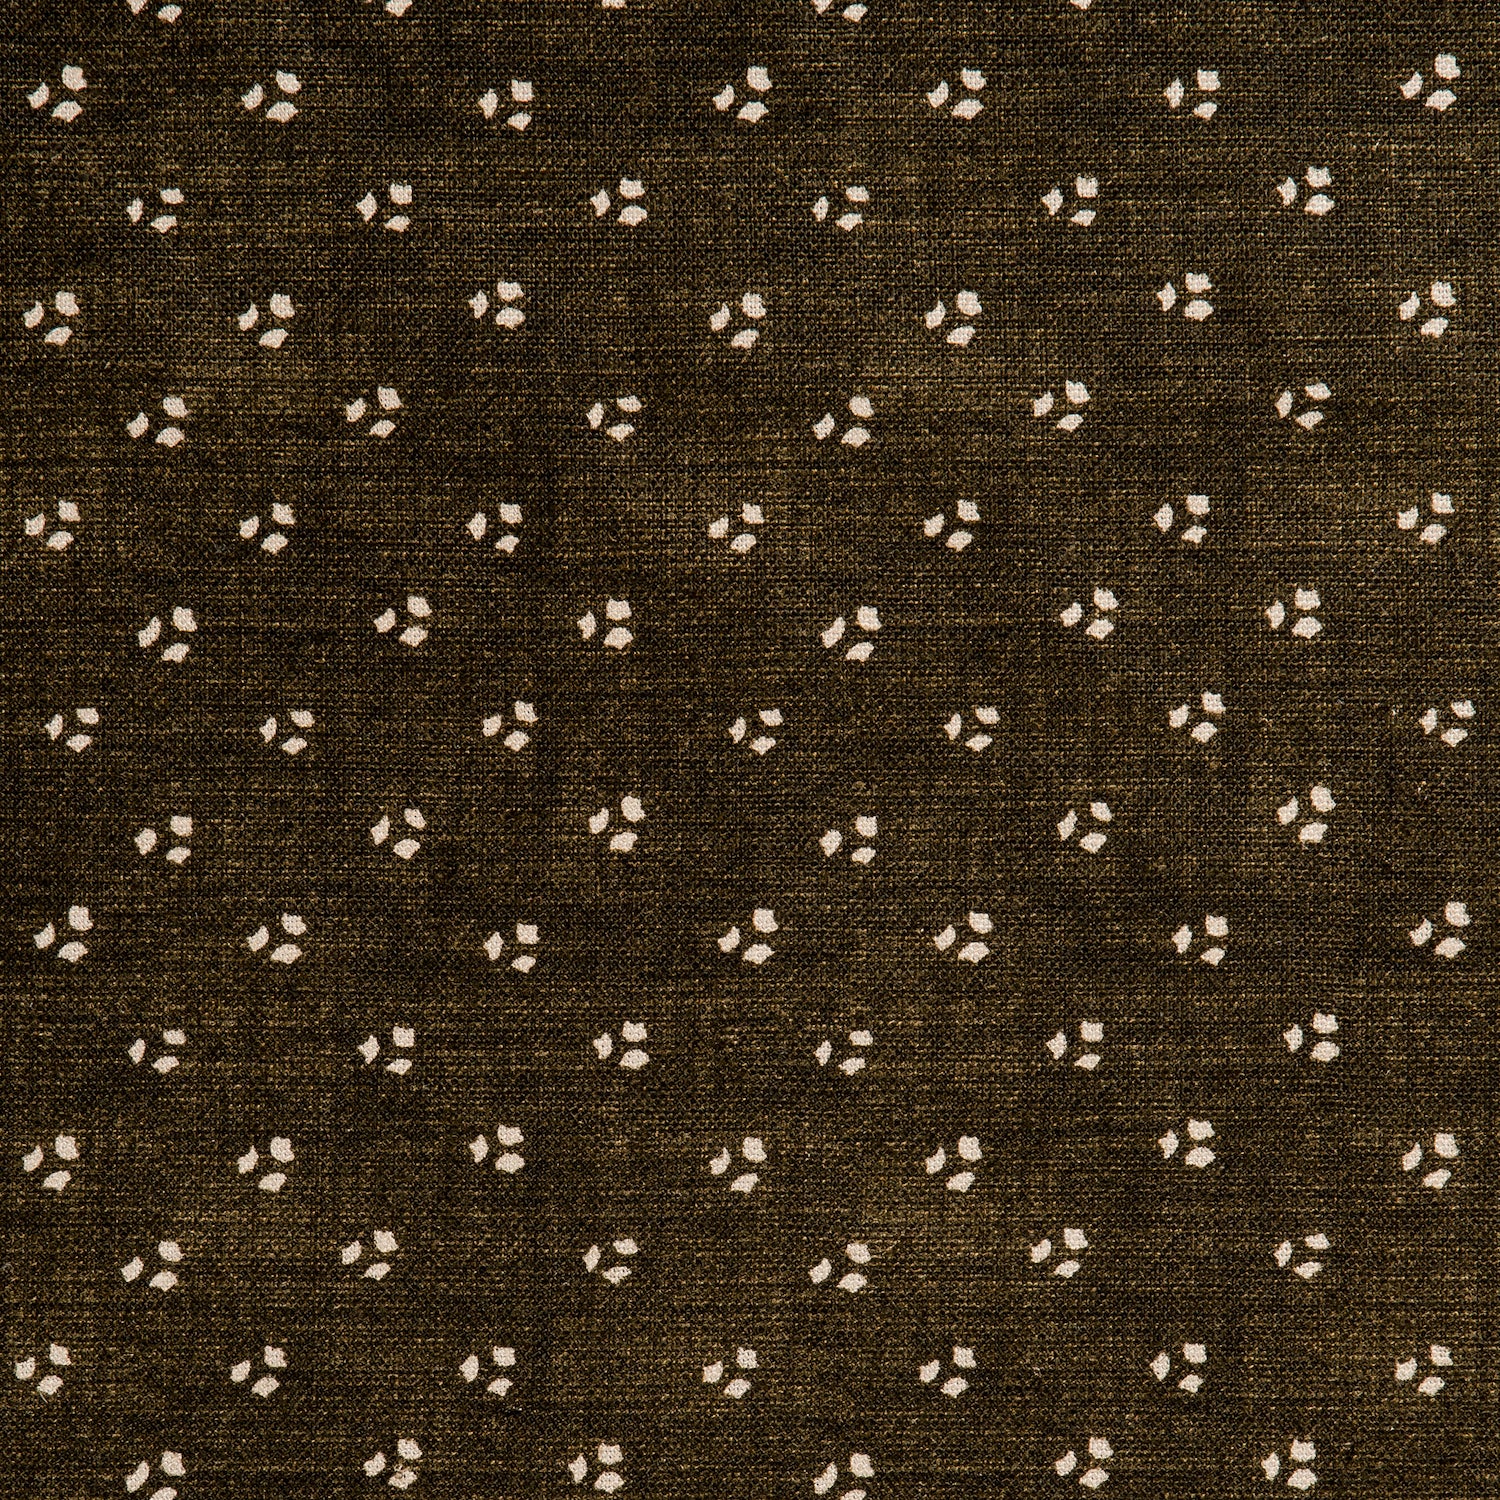 Detail of a linen fabric in a clustered dot pattern in cream on a dark brown field.